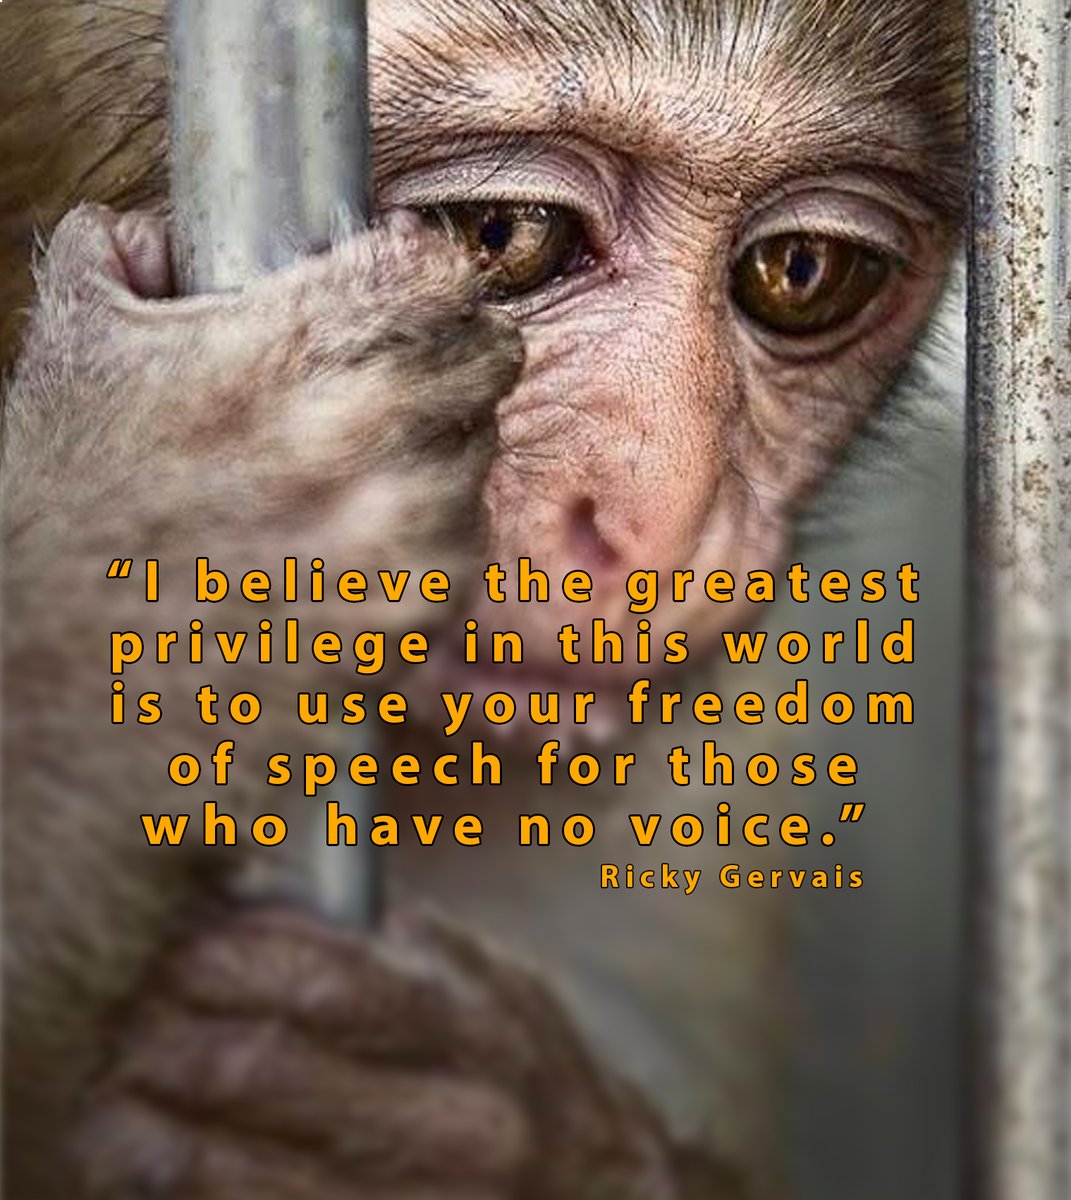 It often feels like we're 'screaming at cruel clouds' but animal advocates are making veganism and #AnimalRights mainstream!👏

Keep screaming for #justice & #compassion🙊⚖️💖

All @AnimalsCount🐒💞

Go #Vegan🐾💞

@RickyGervais @PeterEgan6 @Protect_Wldlife @Veganella_ @JohnOberg